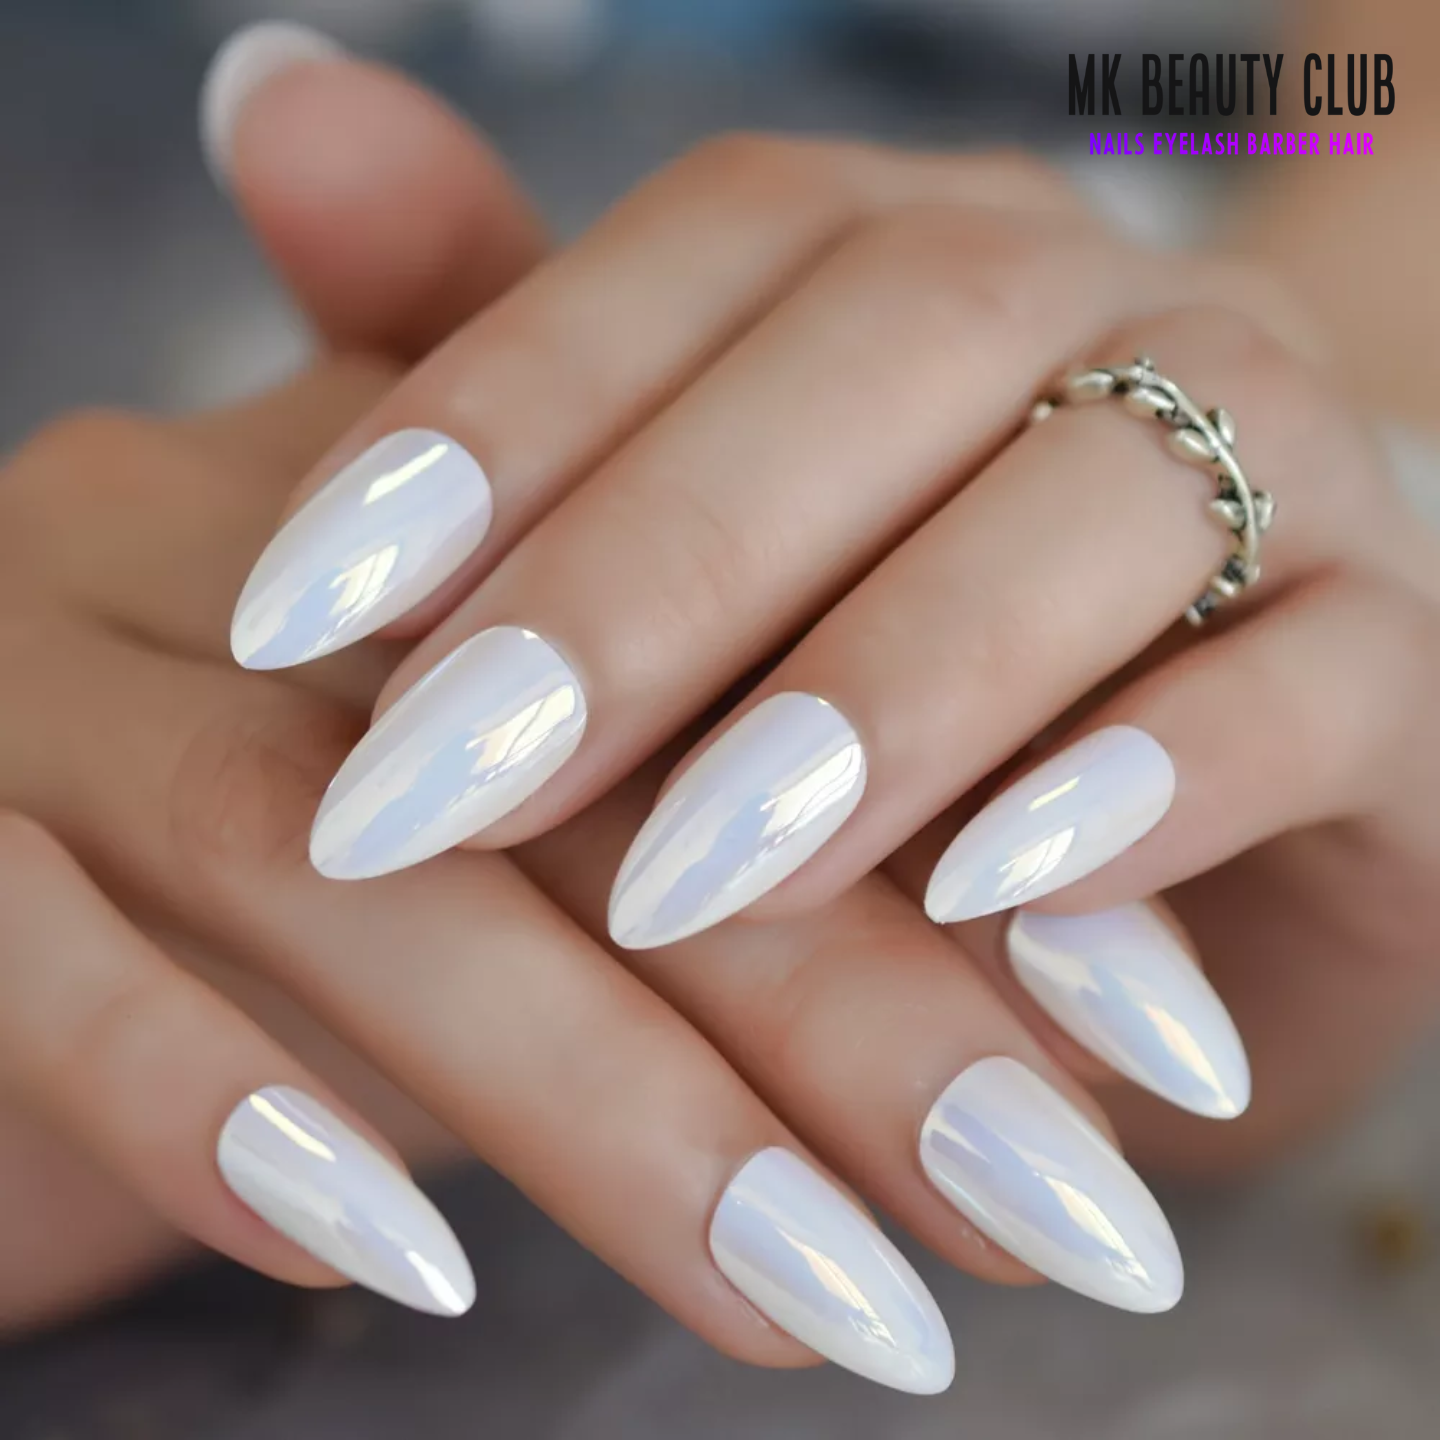 Magical Unicorn Nail Art Ideas to Make Your Manicure Stand Out